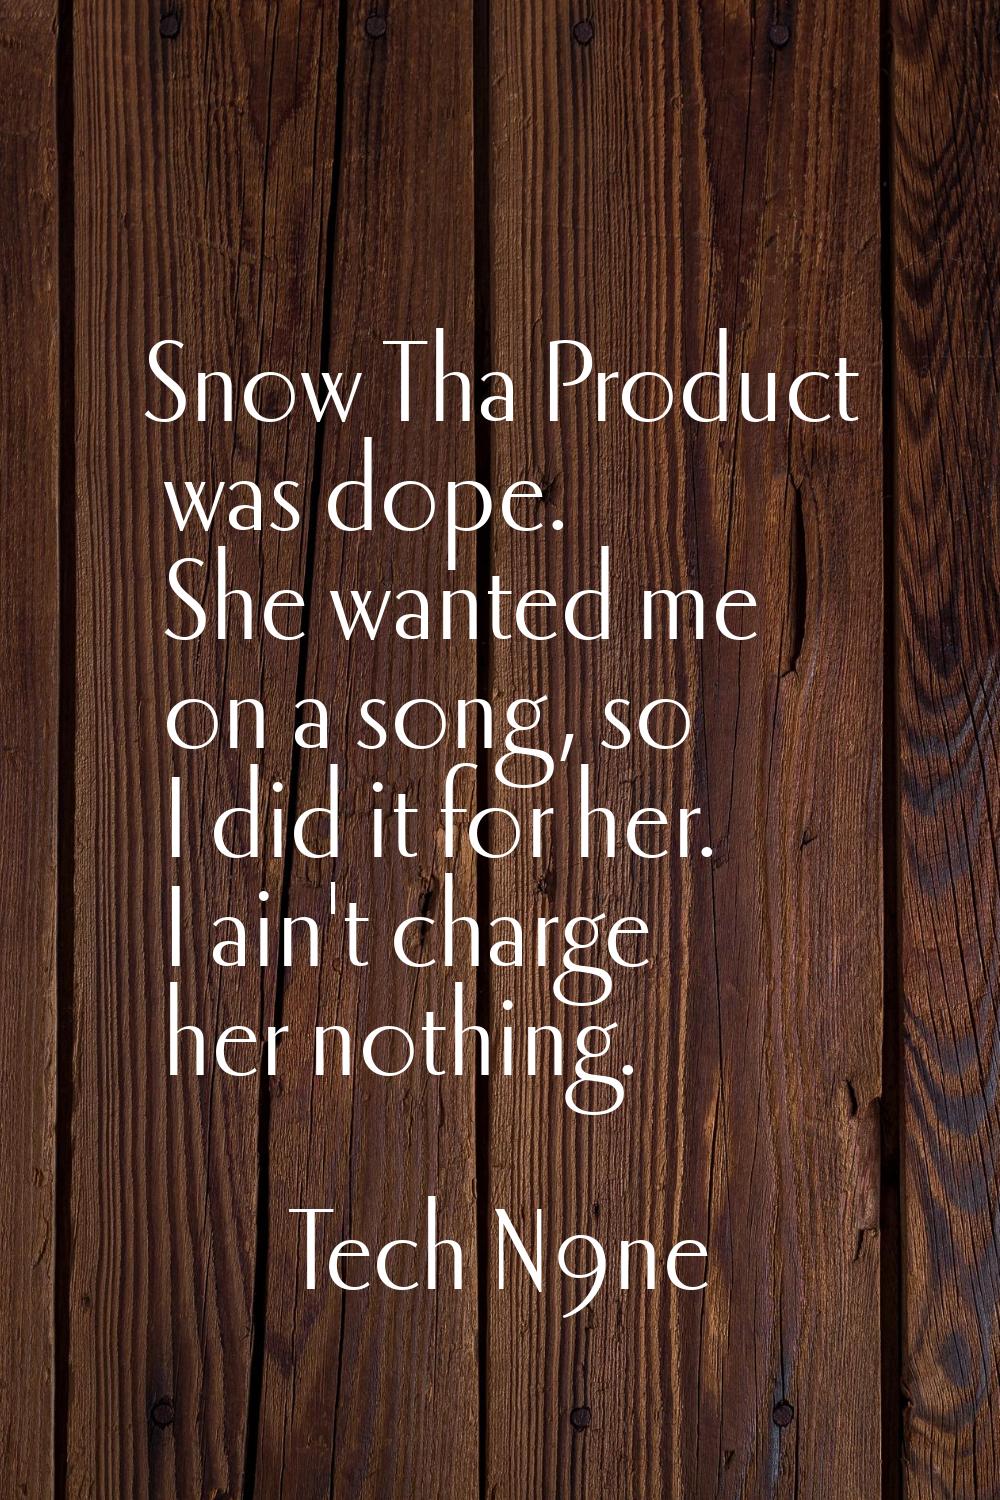 Snow Tha Product was dope. She wanted me on a song, so I did it for her. I ain't charge her nothing